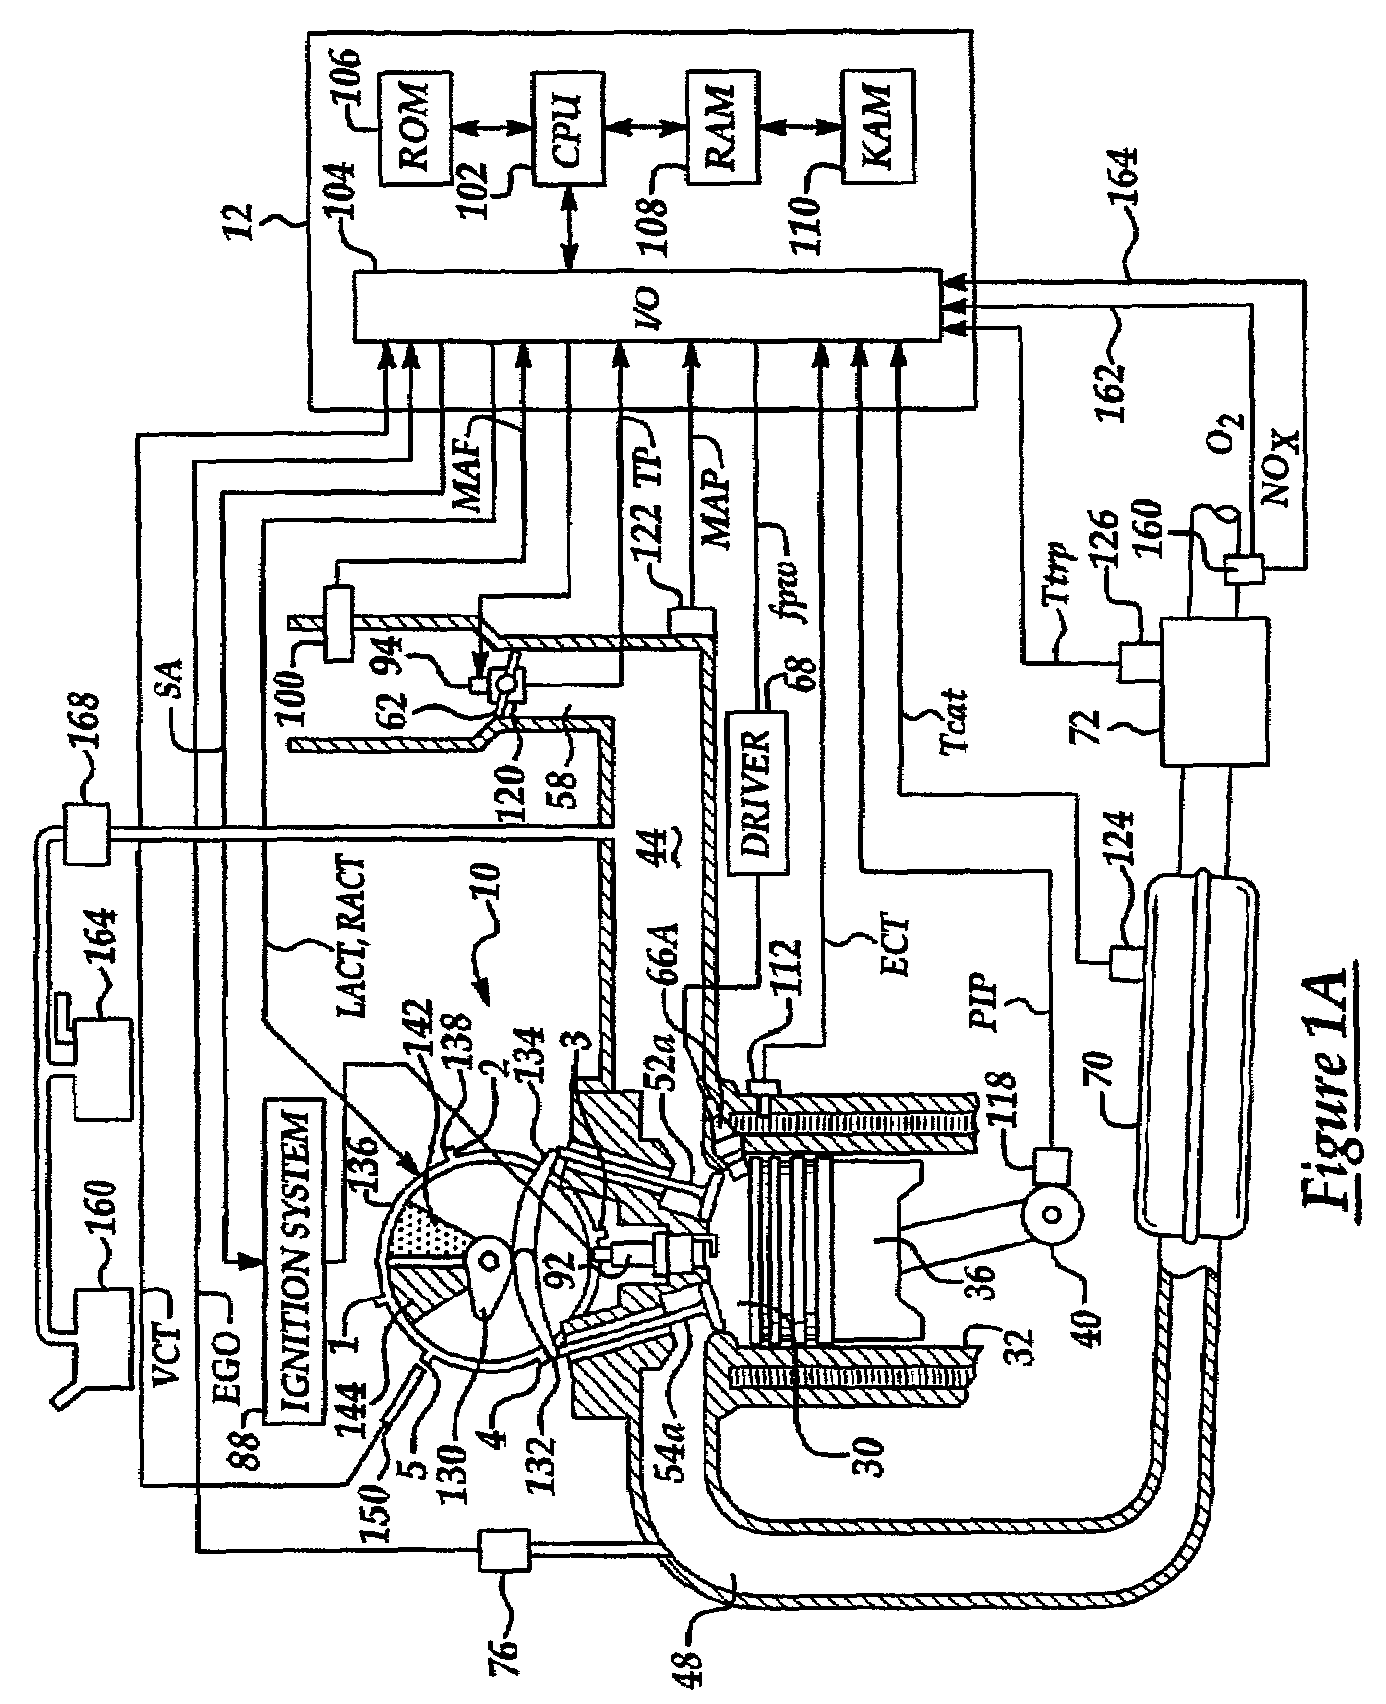 Method for controlling the temperature of an emission control device